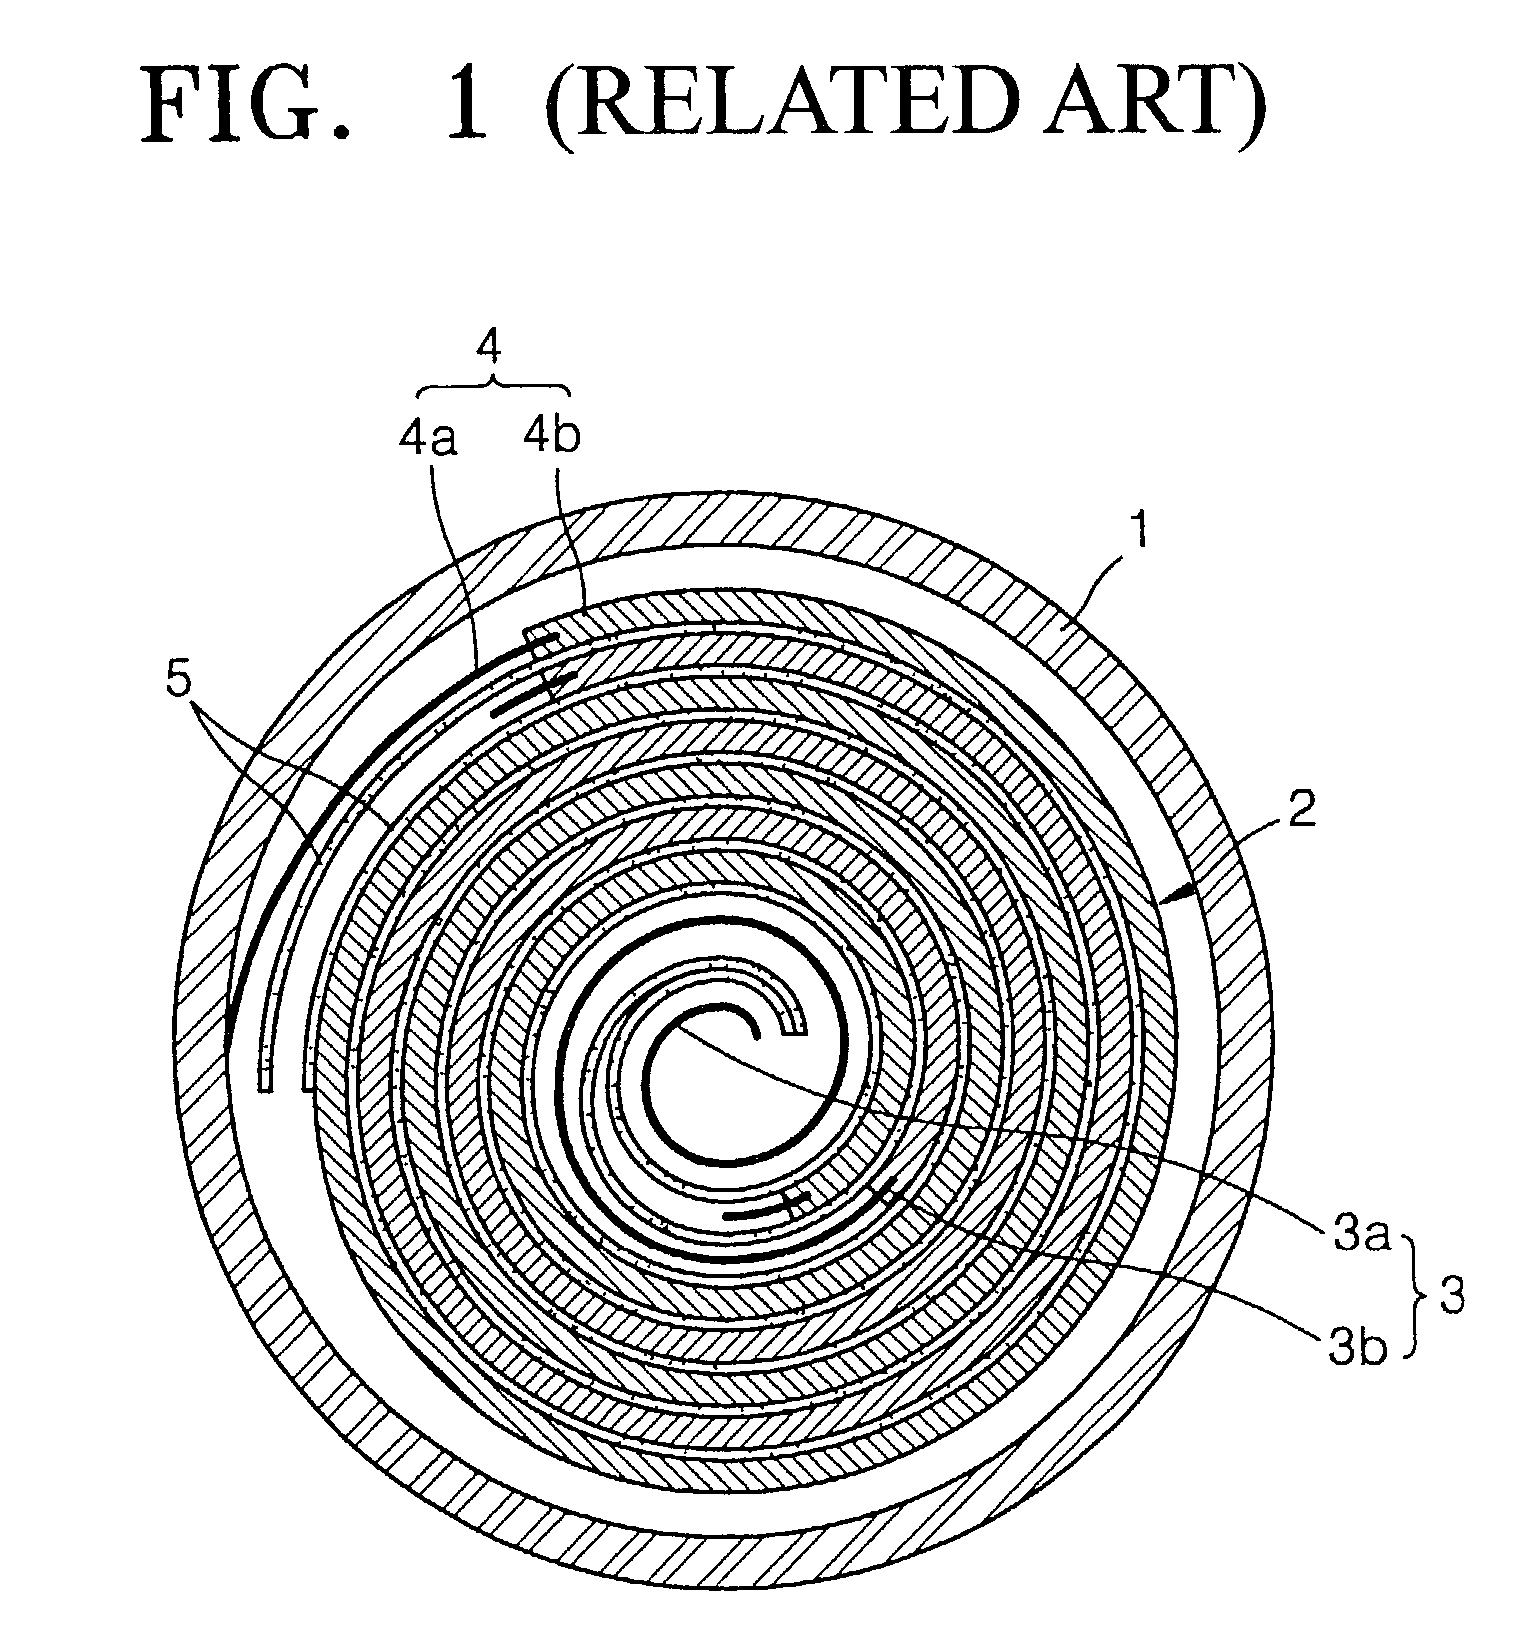 Secondary cell with improved electrode jelly-roll structure